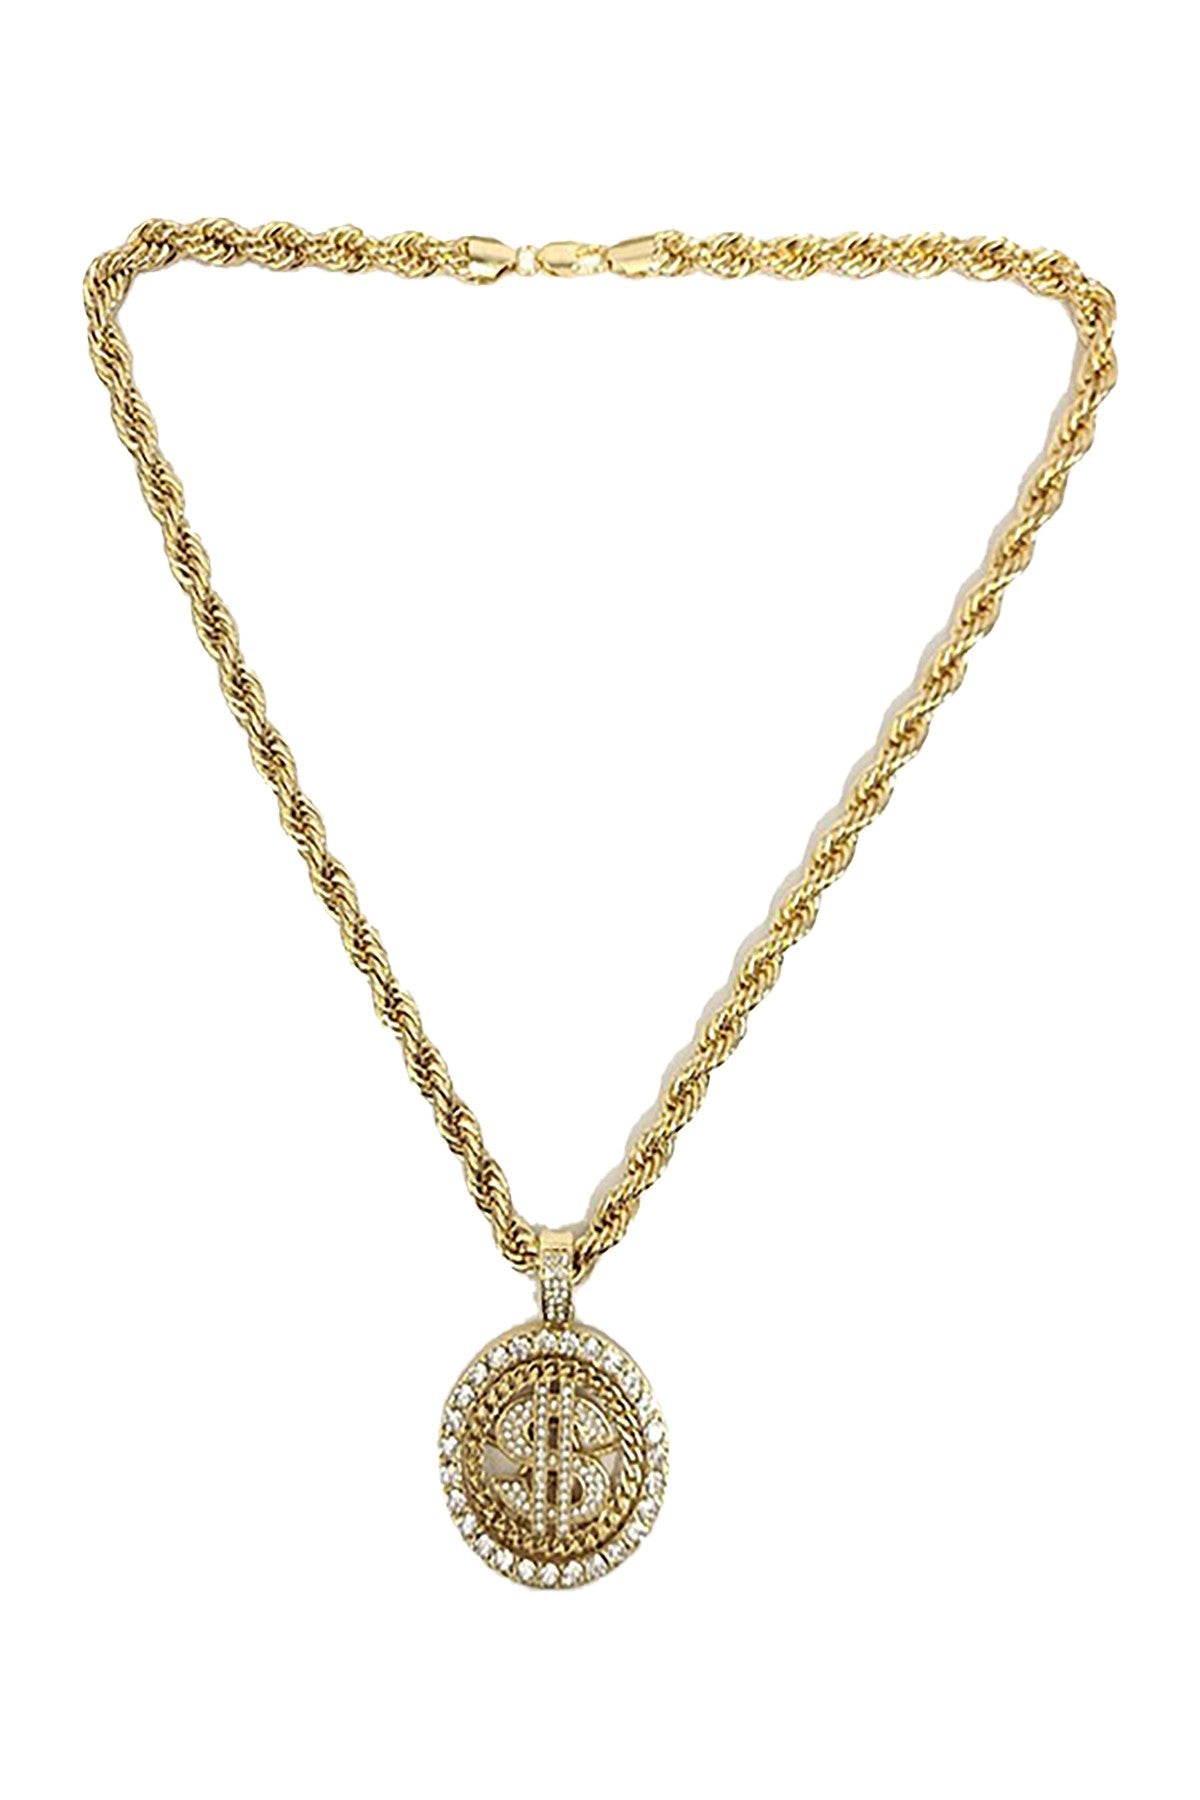 HIP HOP ICED OUT DOLLAR SIGN PENDANT ROPE CHAIN